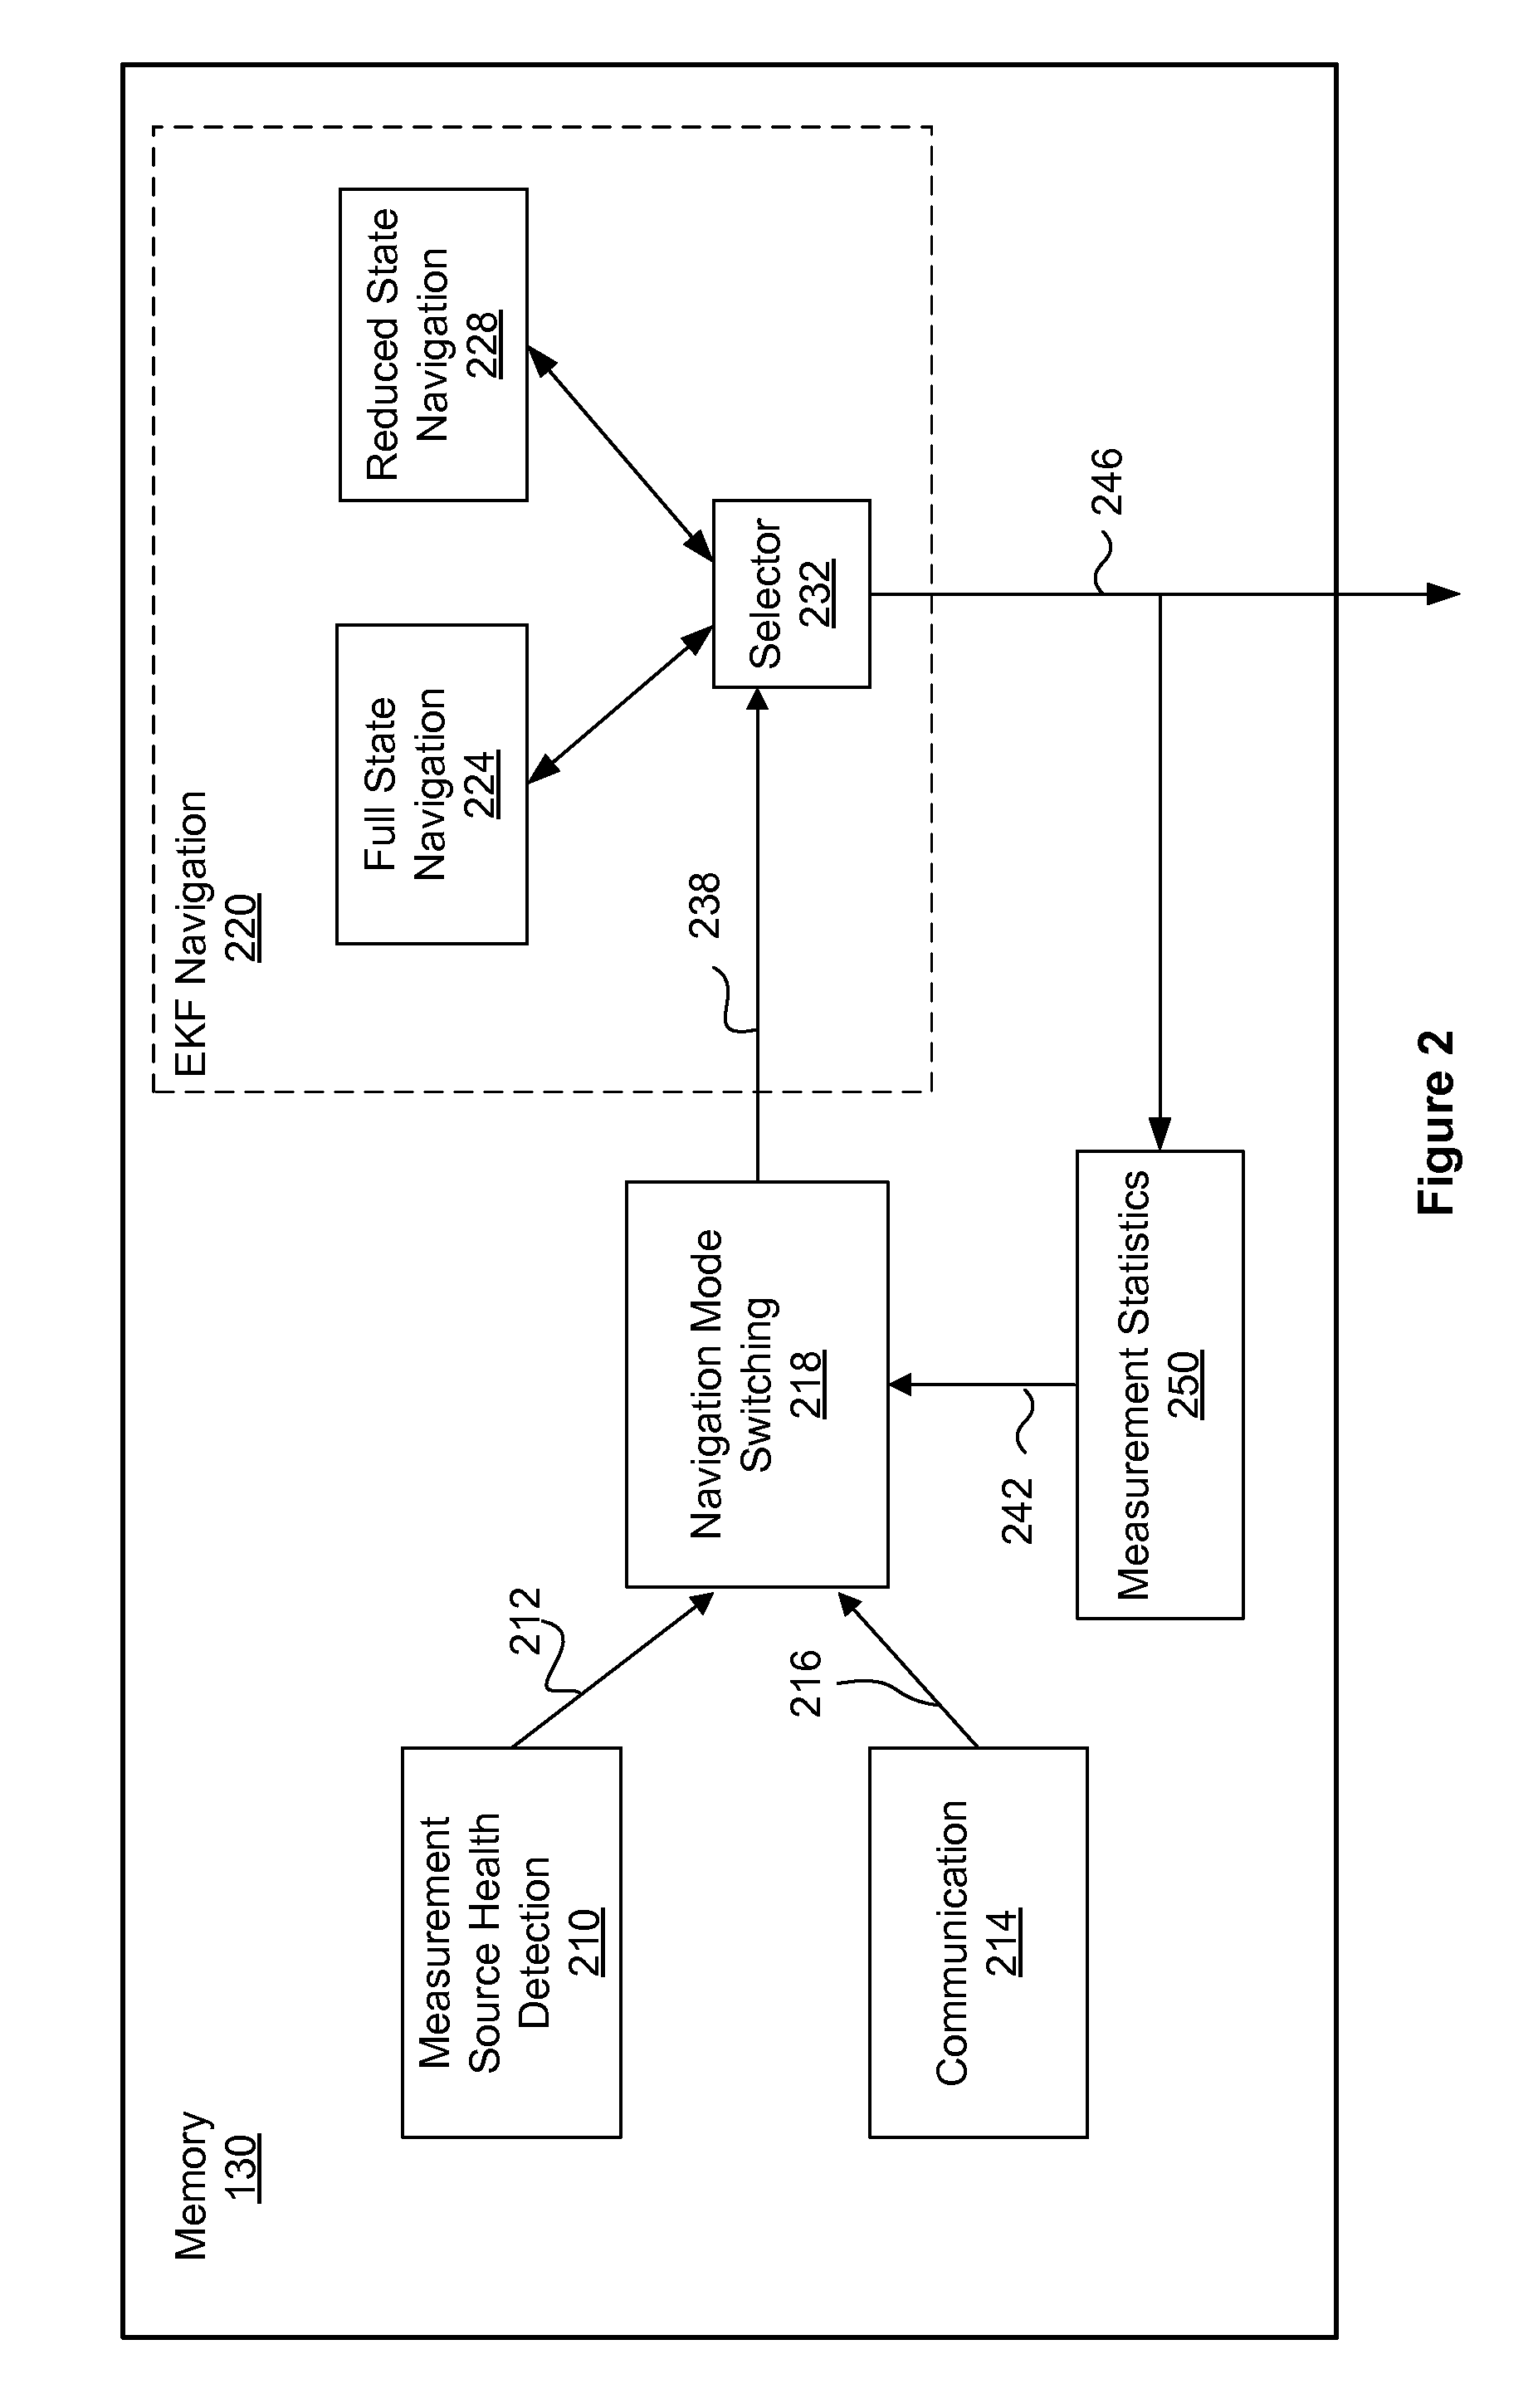 Configurable inertial navigation system with dual extended kalman filter modes